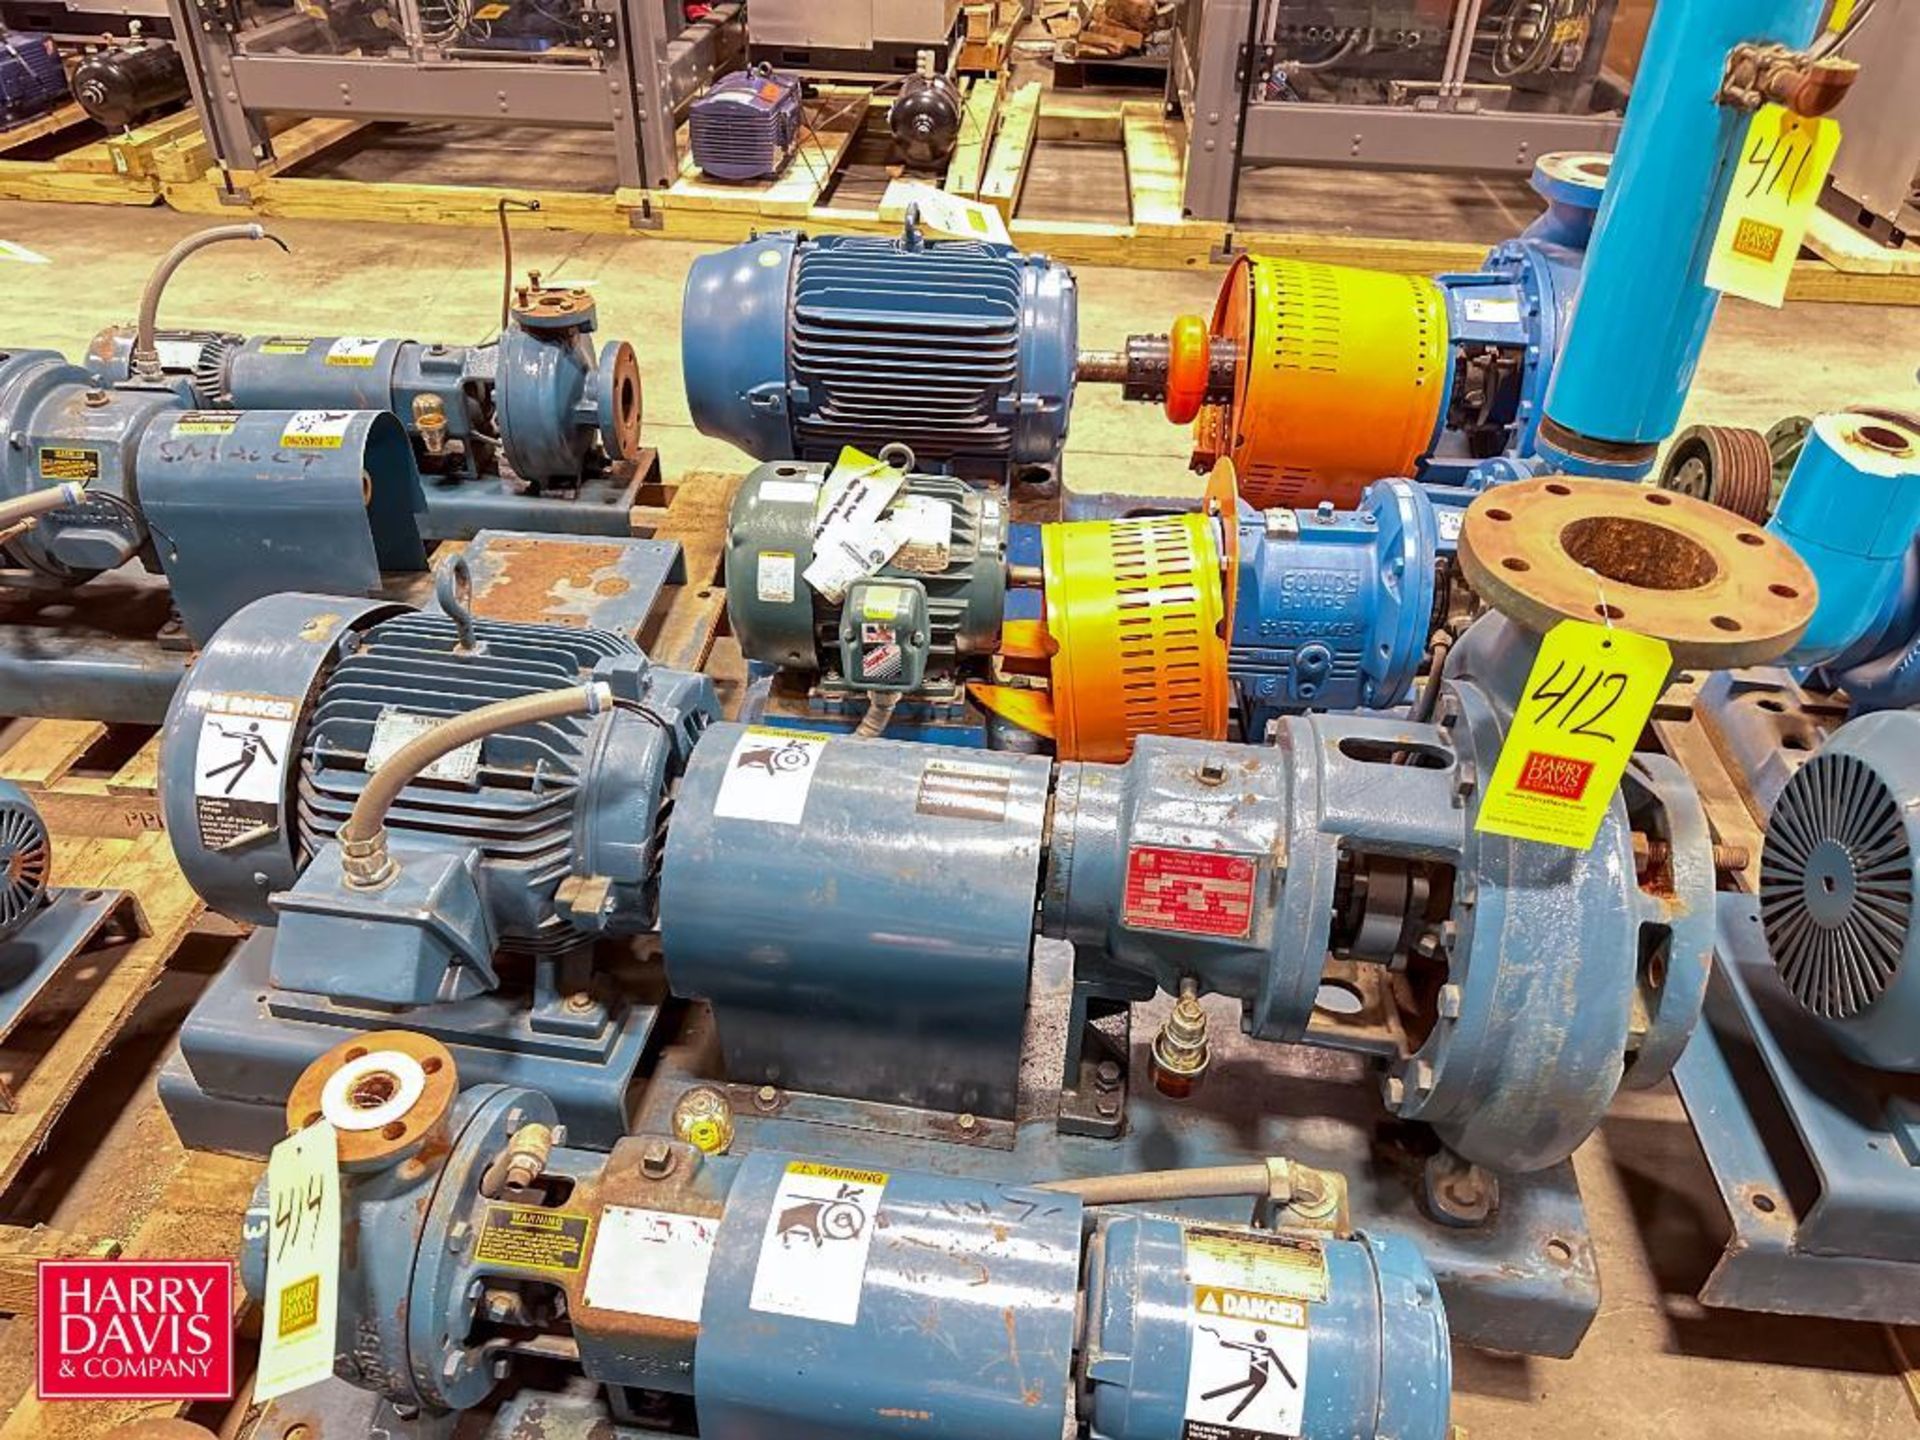 Dean Centrifugal Pump with 7.5 HP Motor - Rigging Fee: $100